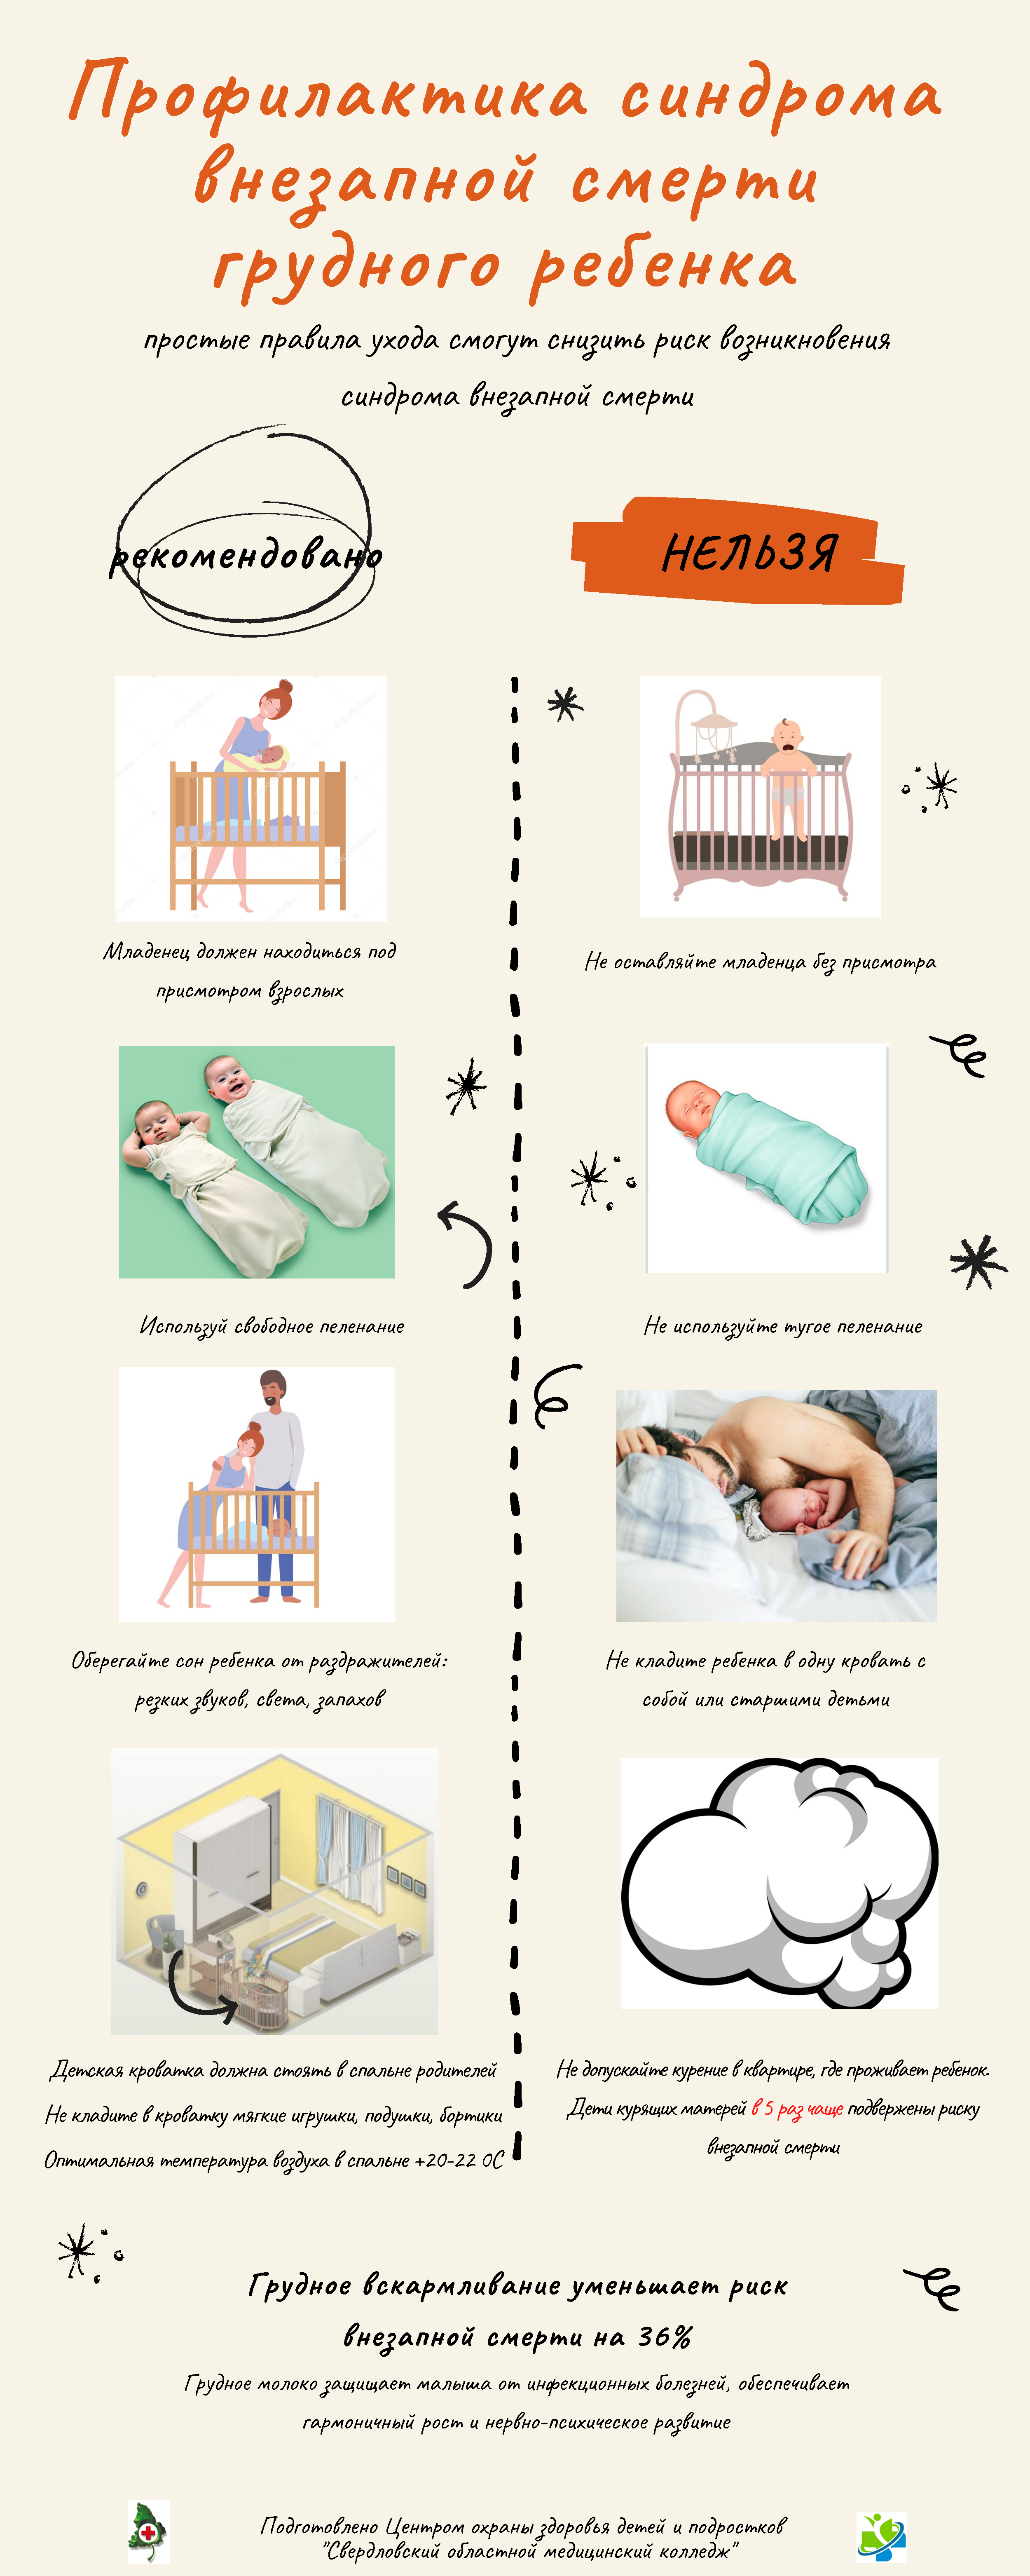 Prevention of sudden infant death syndrome